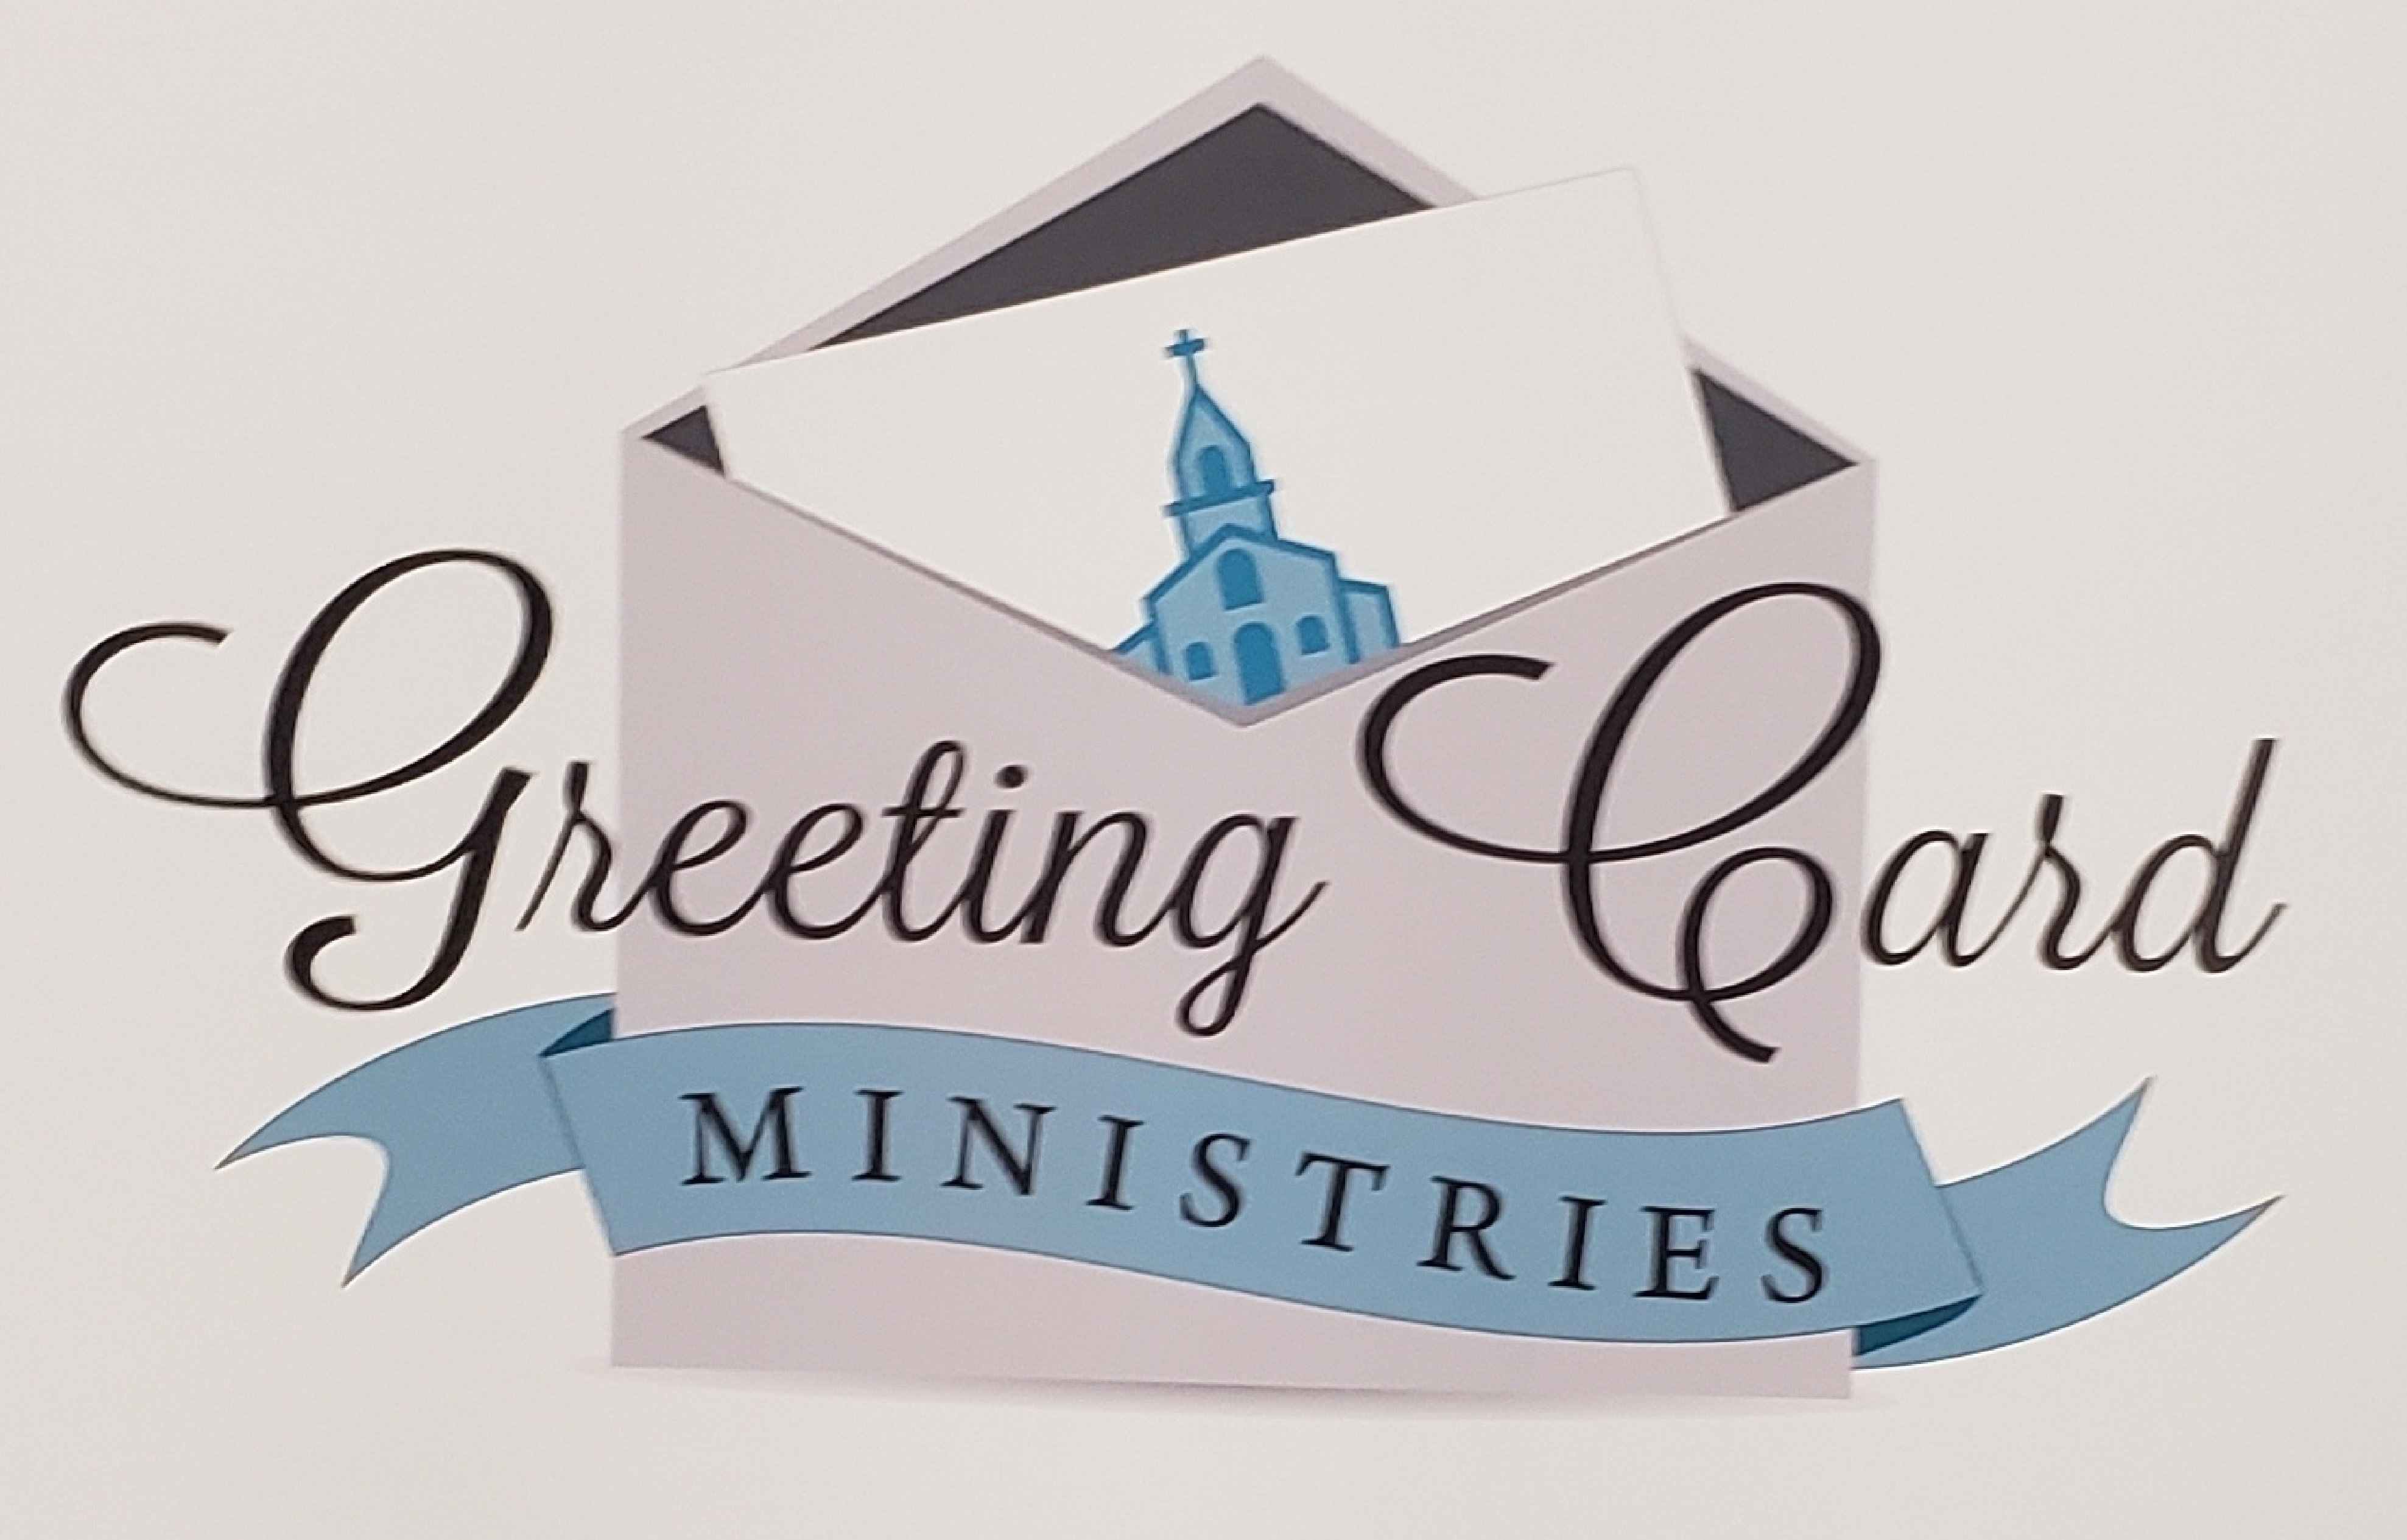 Issue 31-3 – Apostolic News – Greeting Card Ministry